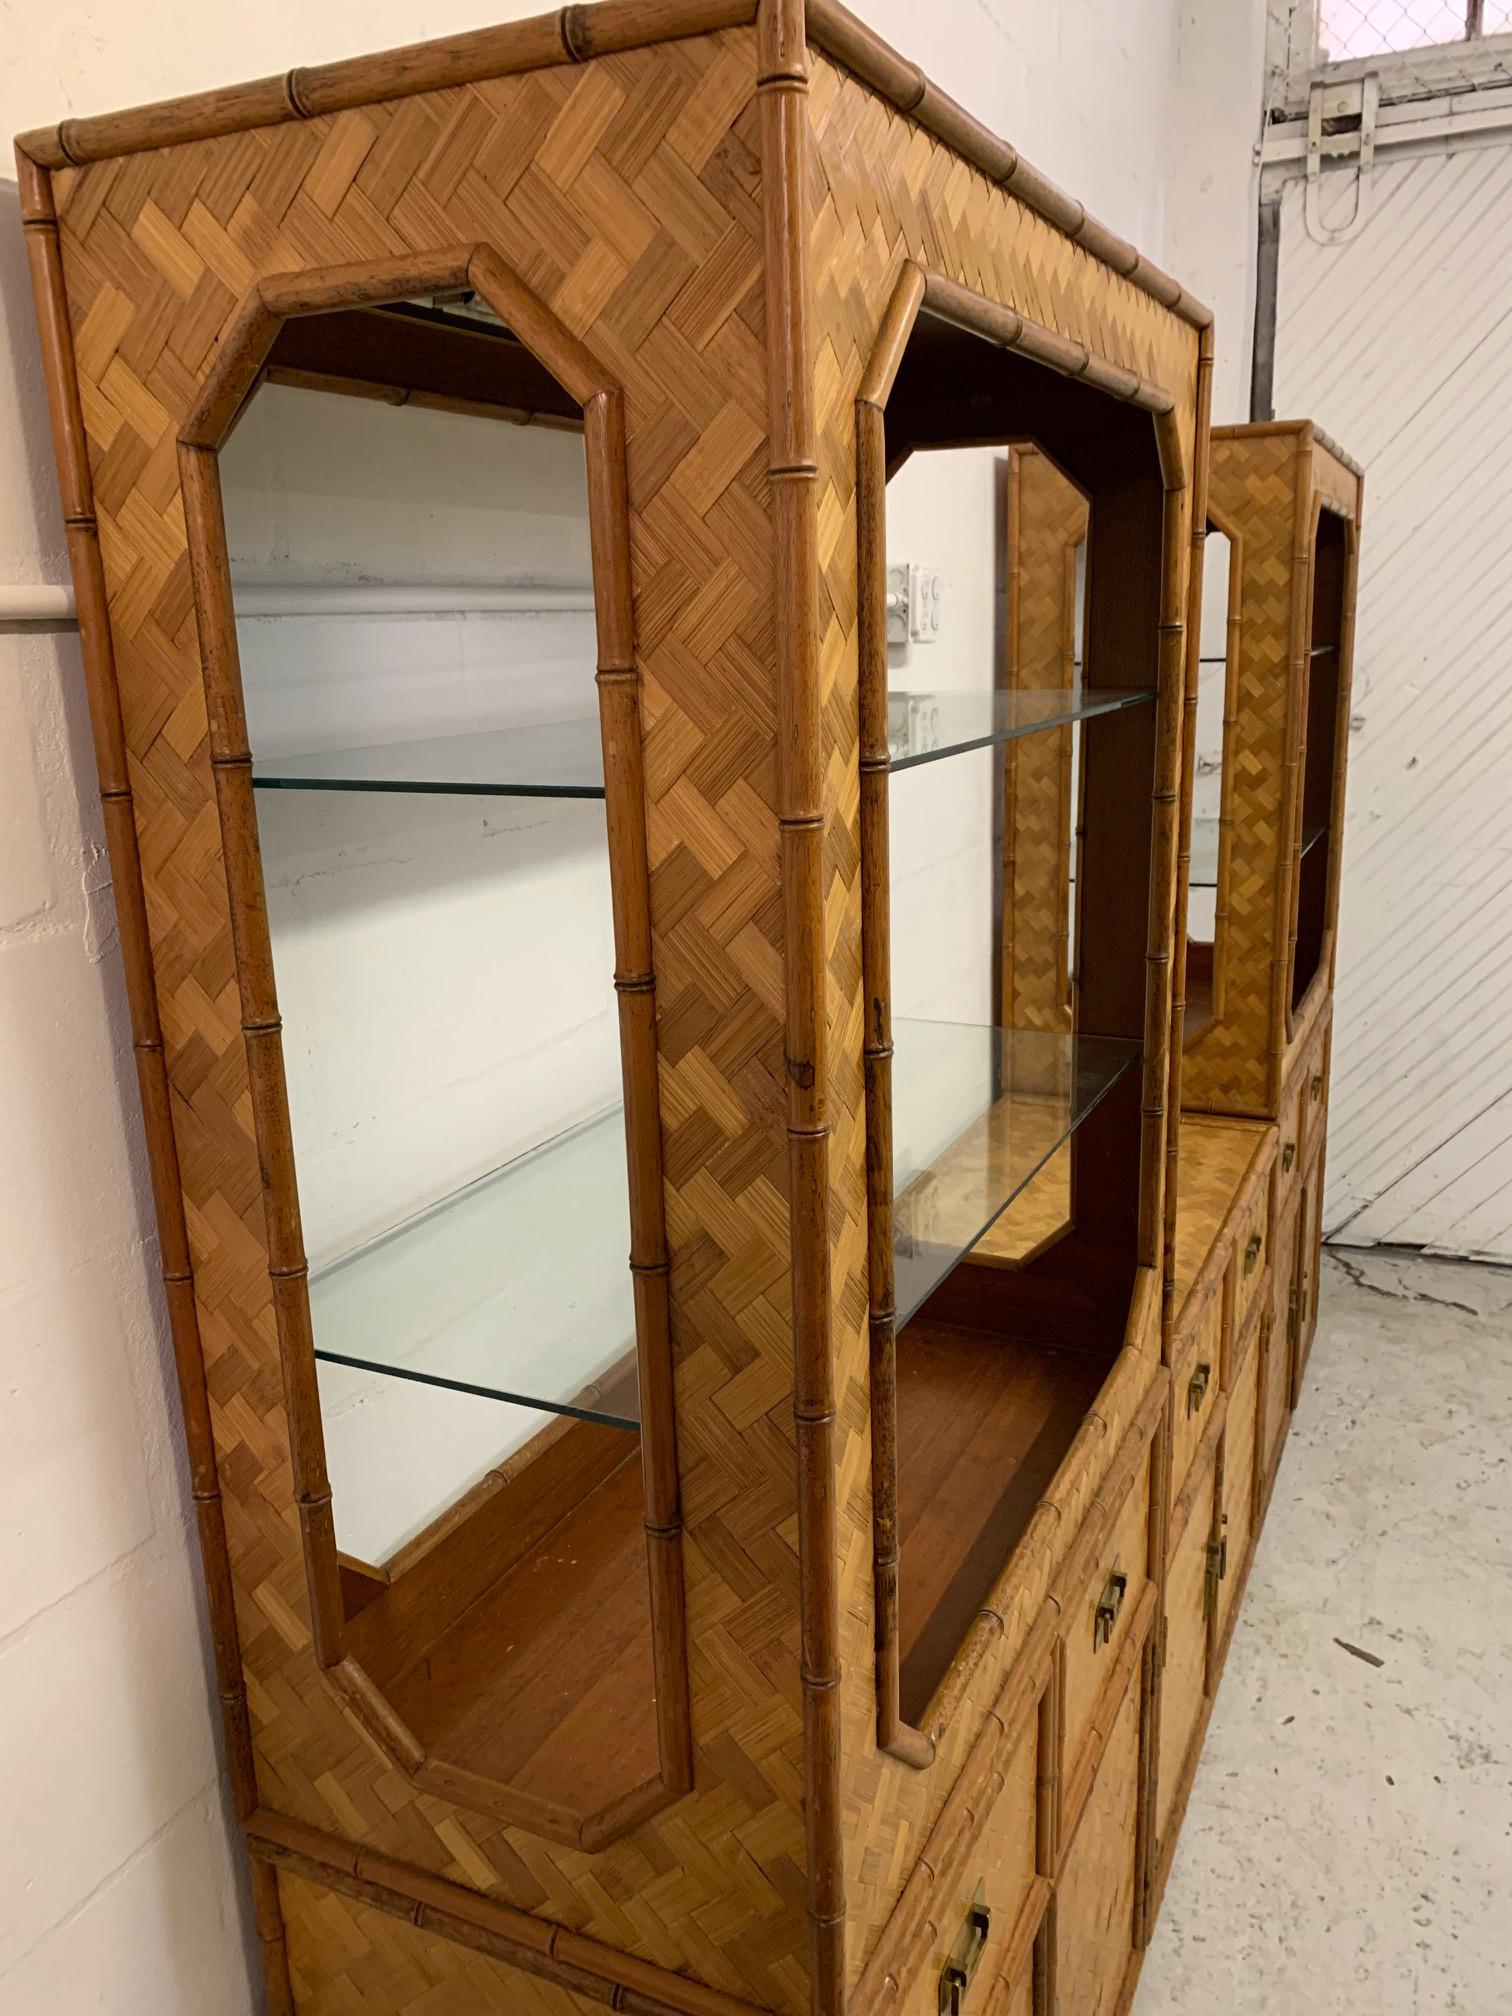 Large 3-piece wall unit consists of matching bookcase towers and a center cabinet. Faux bamboo rattan detailing and full basketweave cane veneer. Brass campaign style hardware. Good vintage condition with minor imperfections consistent with age.
 